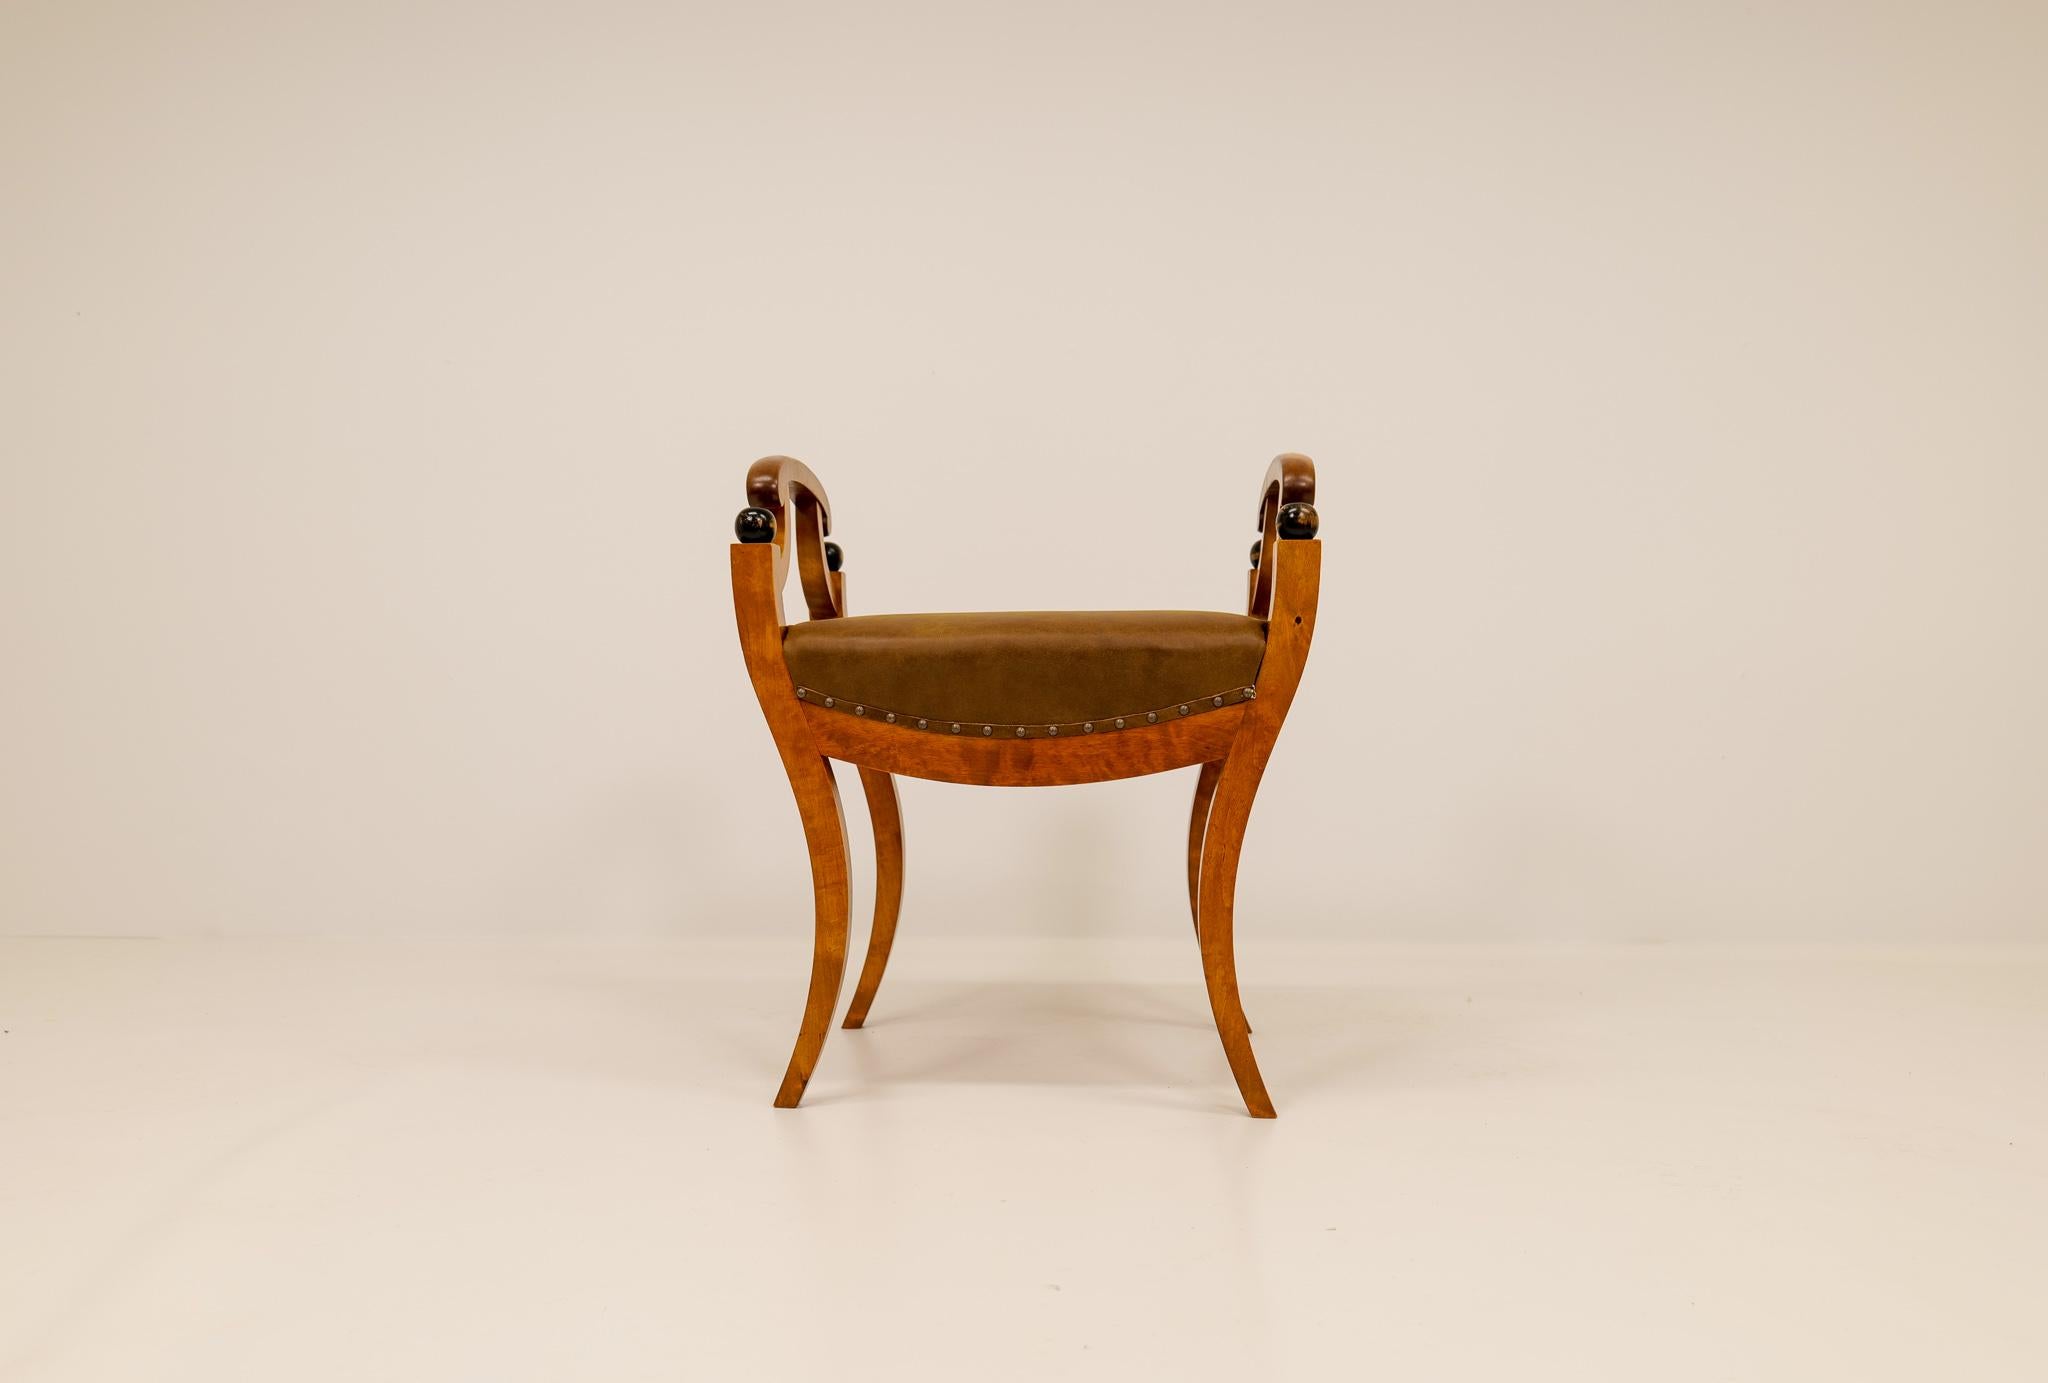 Mid-20th Century Art Deco Swedish Stool in Lacquered Birch and Leather Seat, 1940s